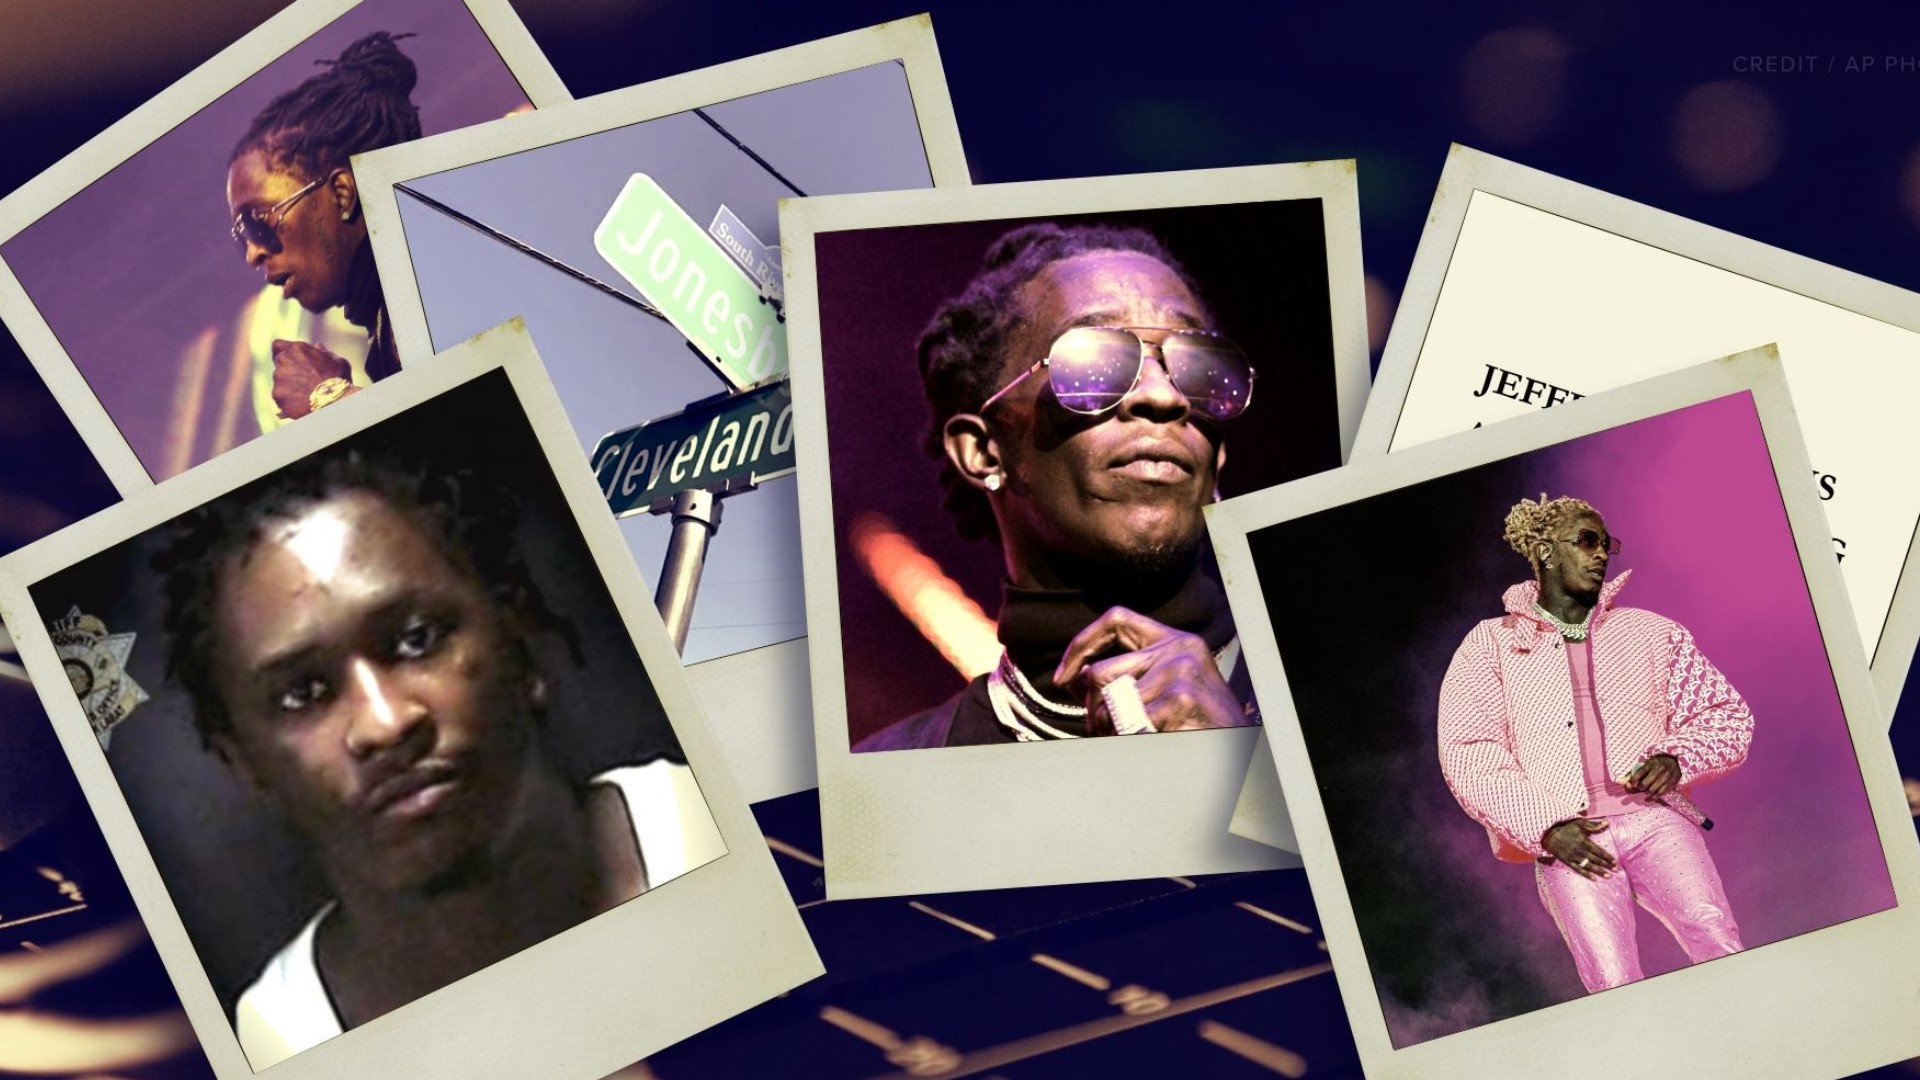 As Young Thug's case nears a trial date, 11Alive’s ‘Jeffery’ series gives an exclusive lens into what this case means – legally, artistically and culturally.